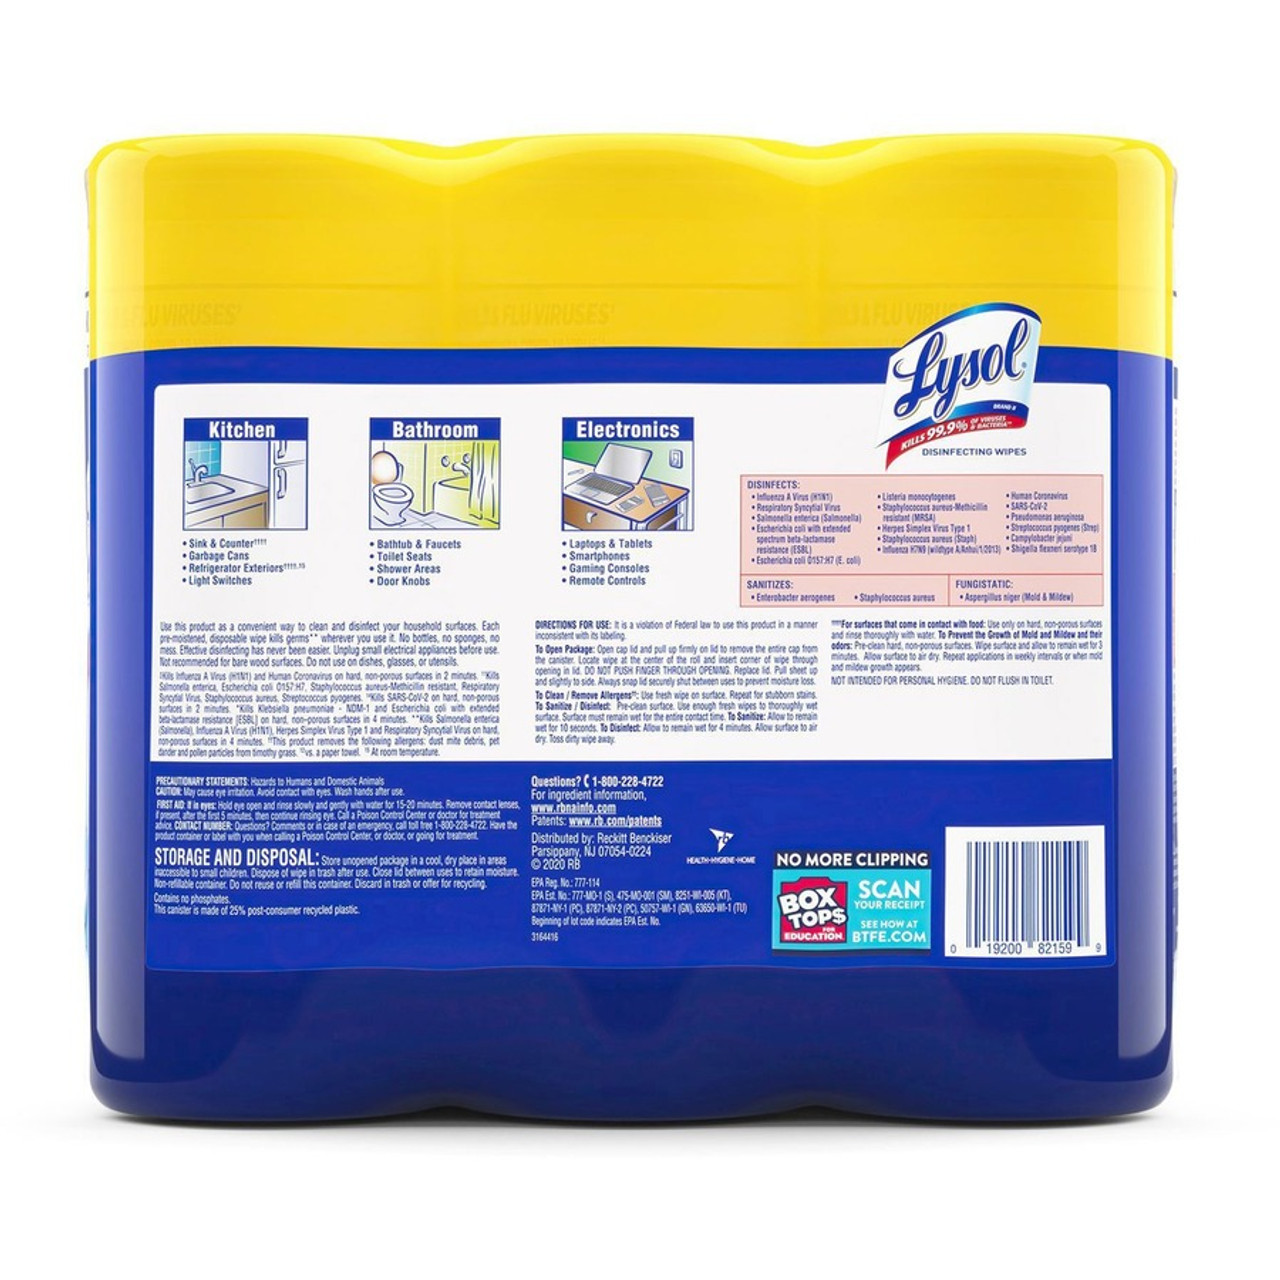 Lysol Disinfecting Wipes, Lemon & Lime Blossom Scent, 8.9 oz (252 g), 35  Wipes